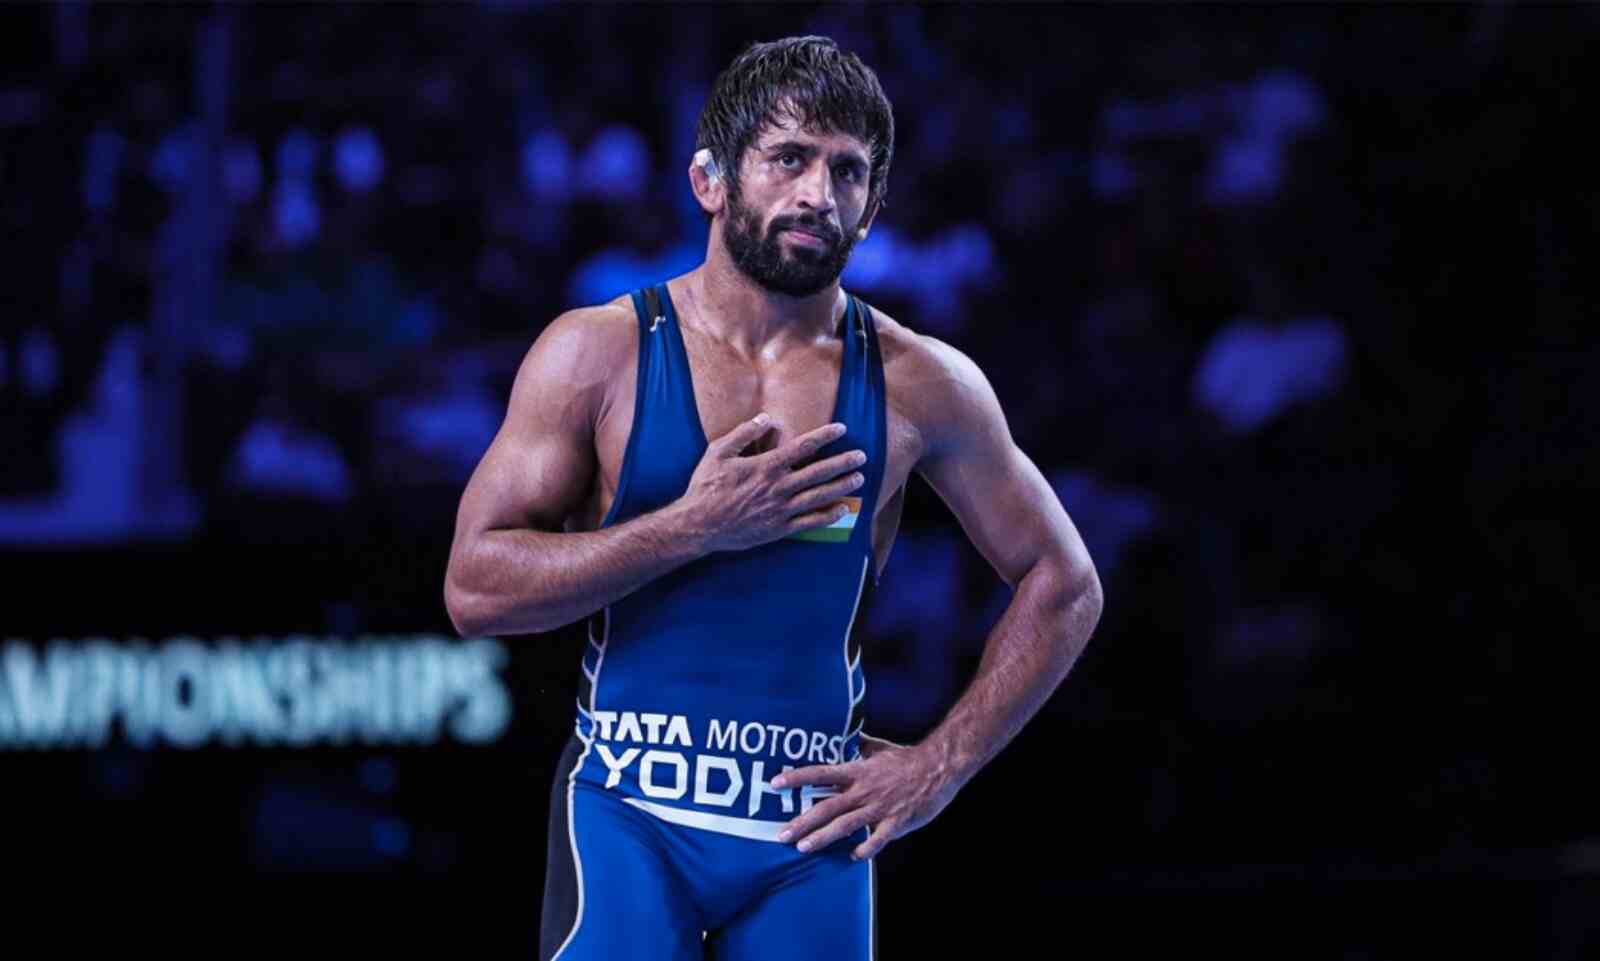 Commonwealth Games 2022: BIG SETBACK for Bajrang Punia, training trip to US ahead of CWG delayed due to visa issues